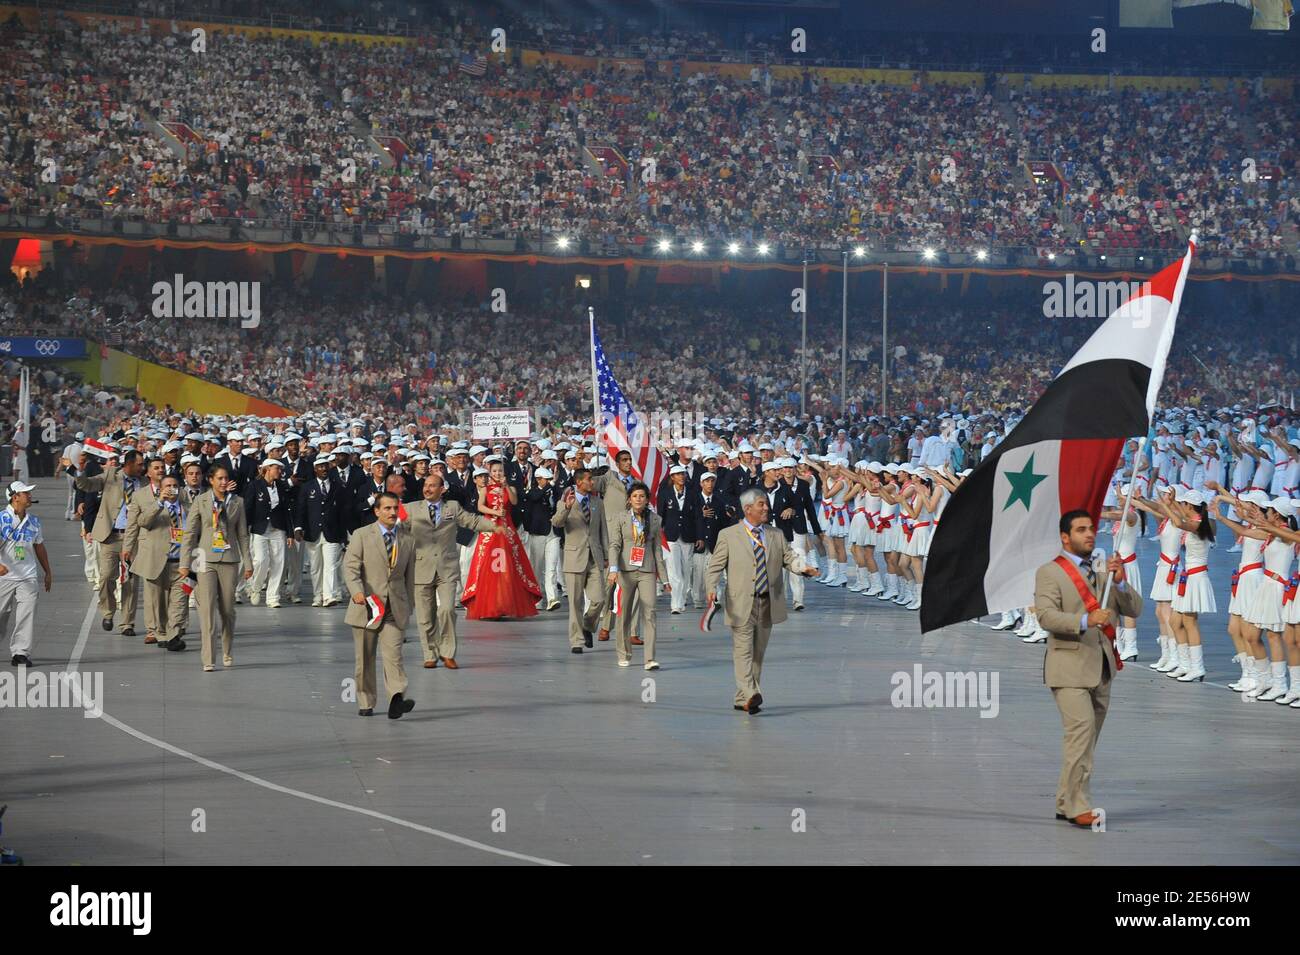 The Syrian delegation during the Opening Ceremony for the 2008 Beijing Summer Olympics at the National Stadium in Beijing, China on August 8, 2008. Photo by Jean-Michel Psaila/ABACAPRESS.COM Stock Photo